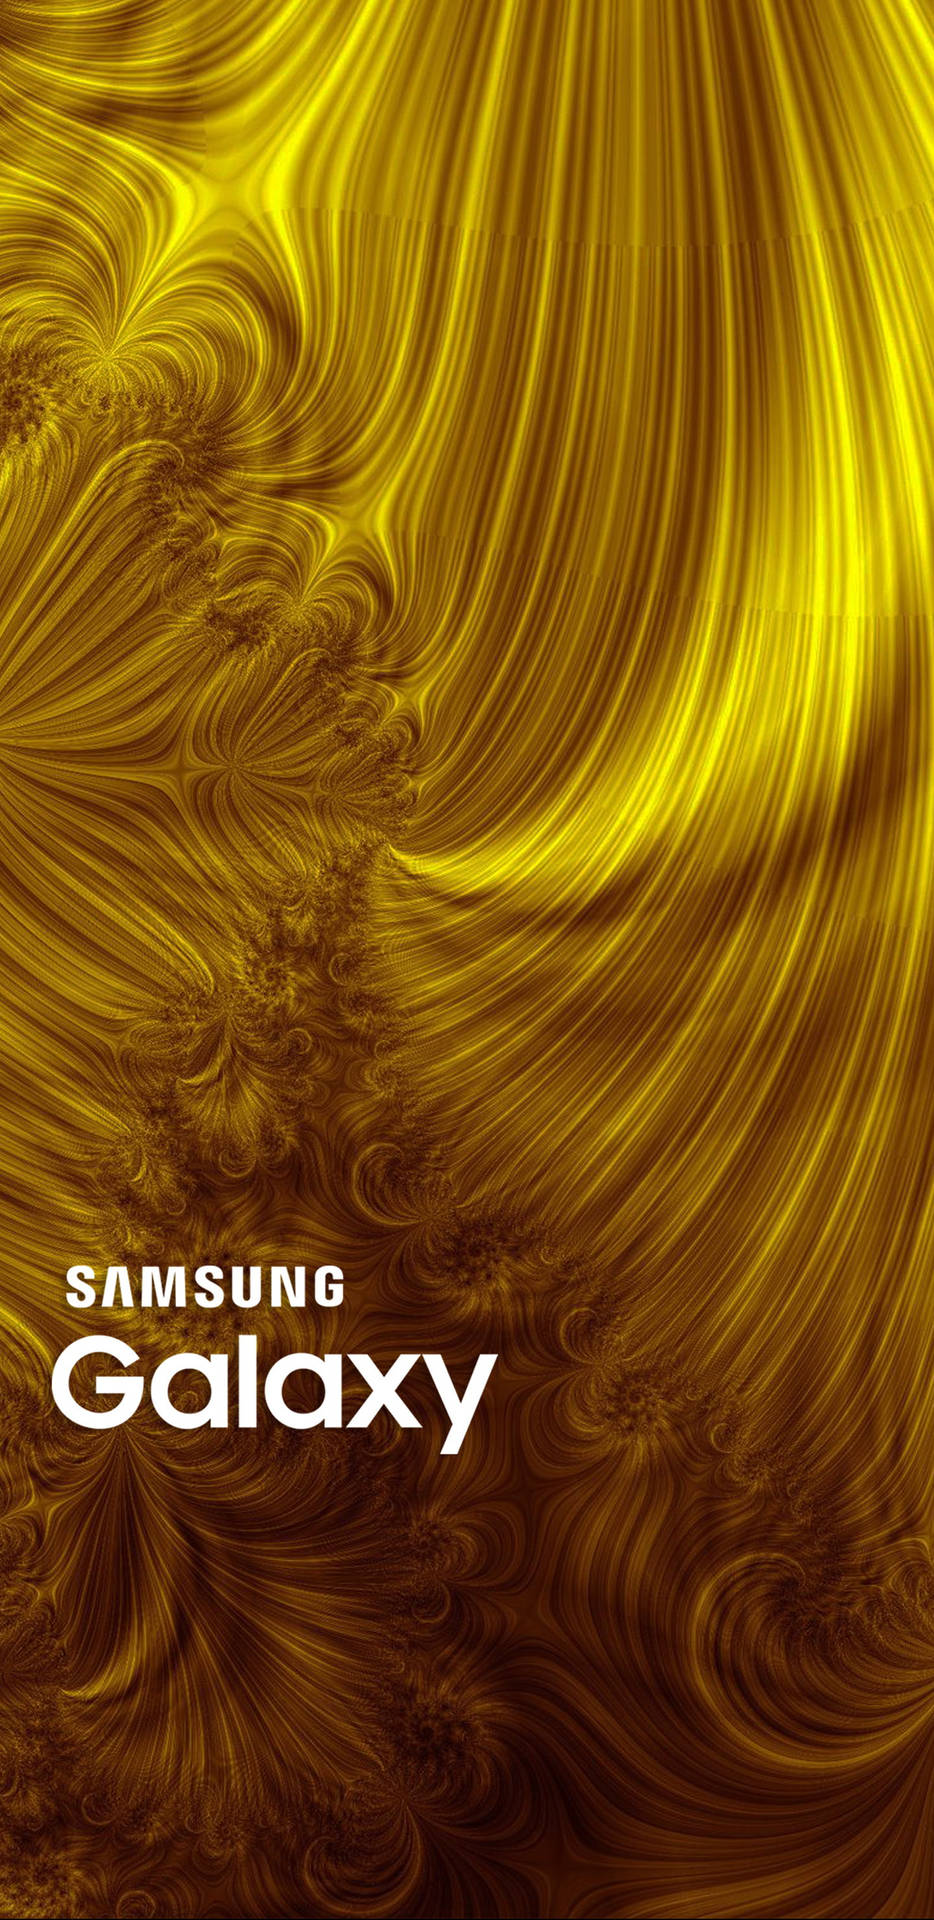 Samsung Galaxy Abstract Gold Fractal Background